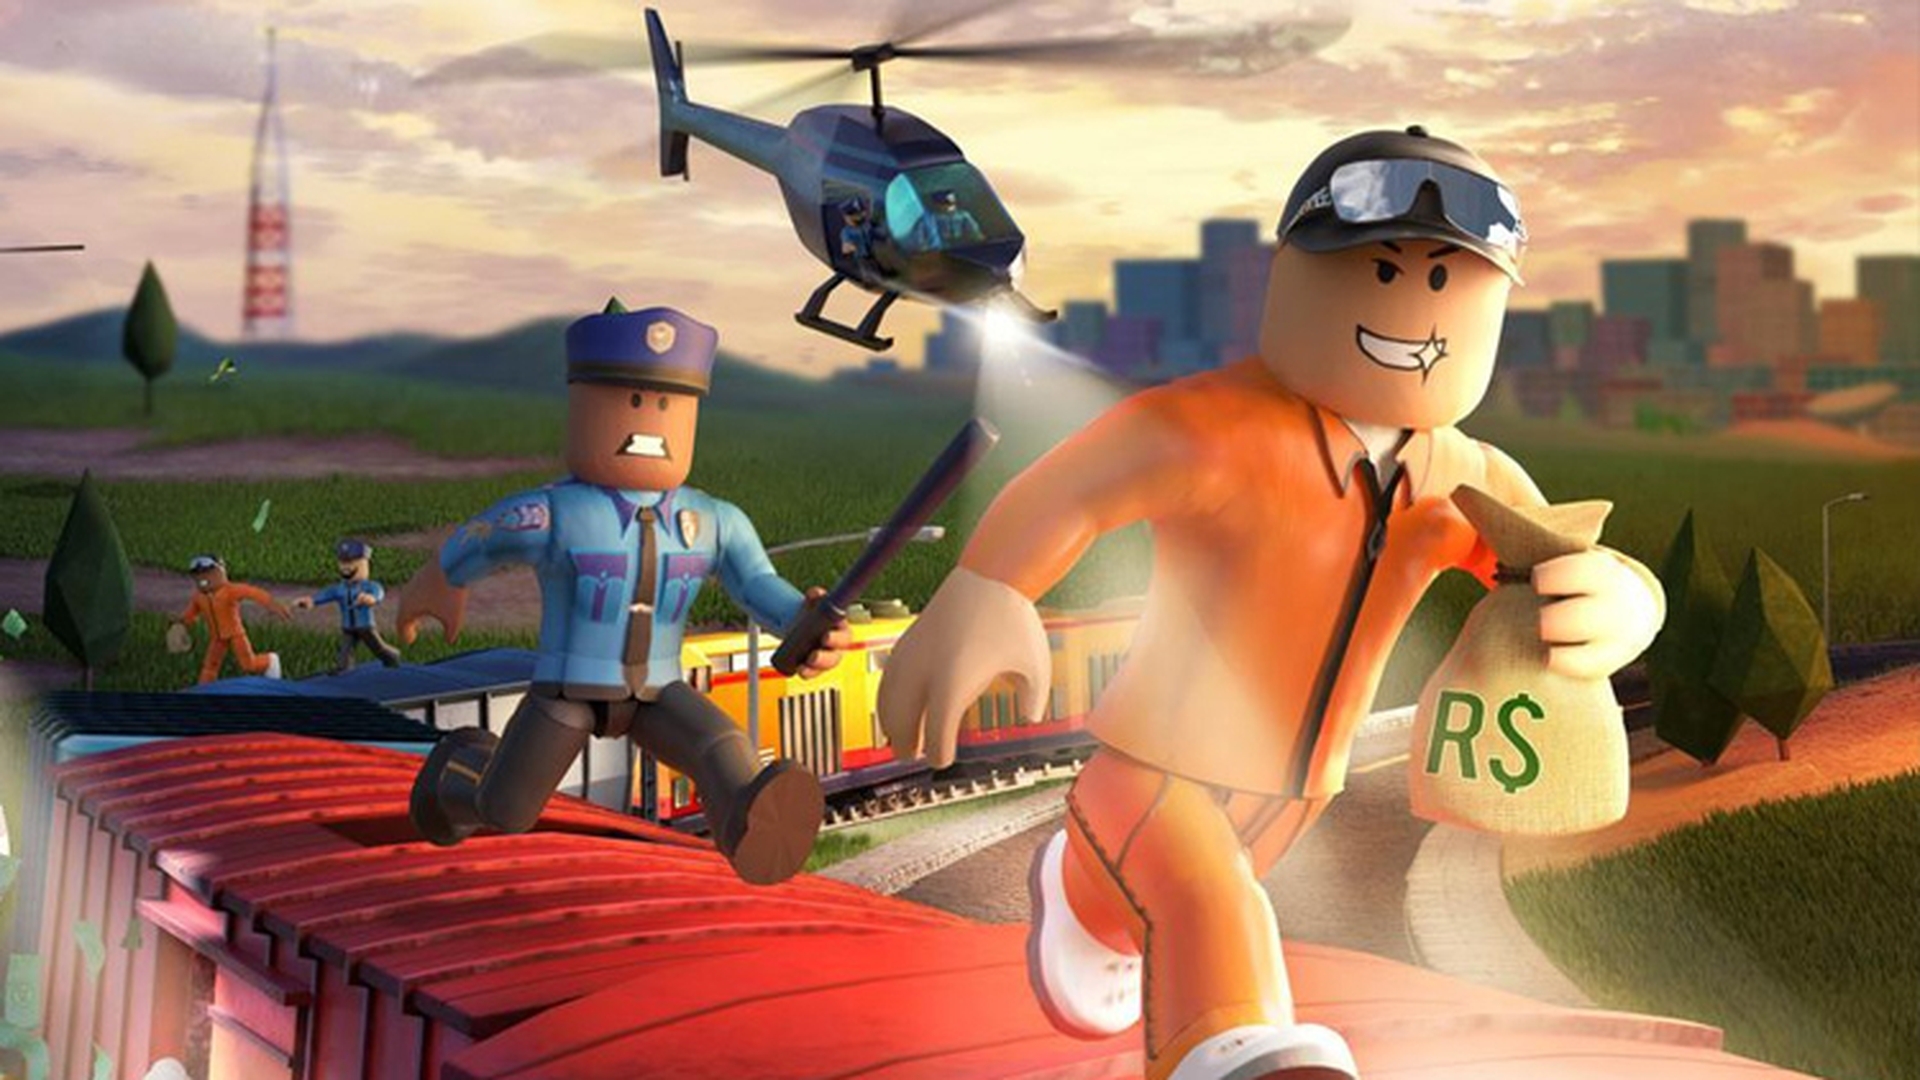 Roblox is more popular then ever but some players are experiencing issues, that's why we will cover how to fix error code 103 Roblox on Xbox today.